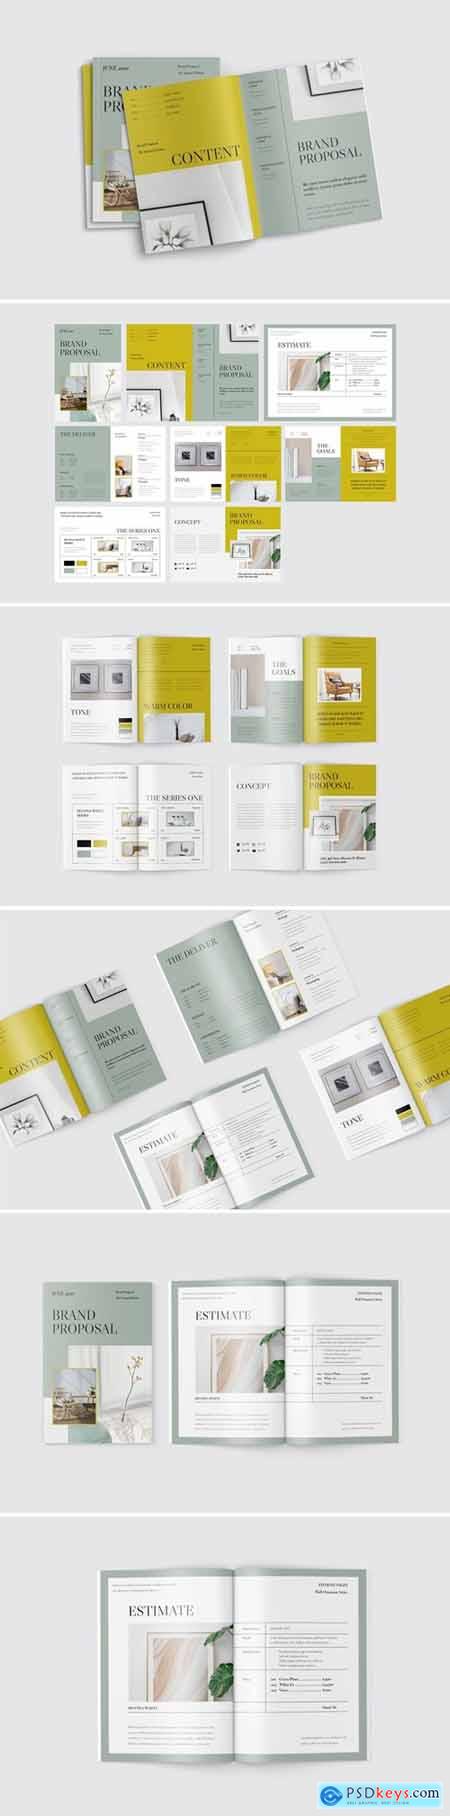 Brand Proposal Template Free Download Photoshop Vector Stock image